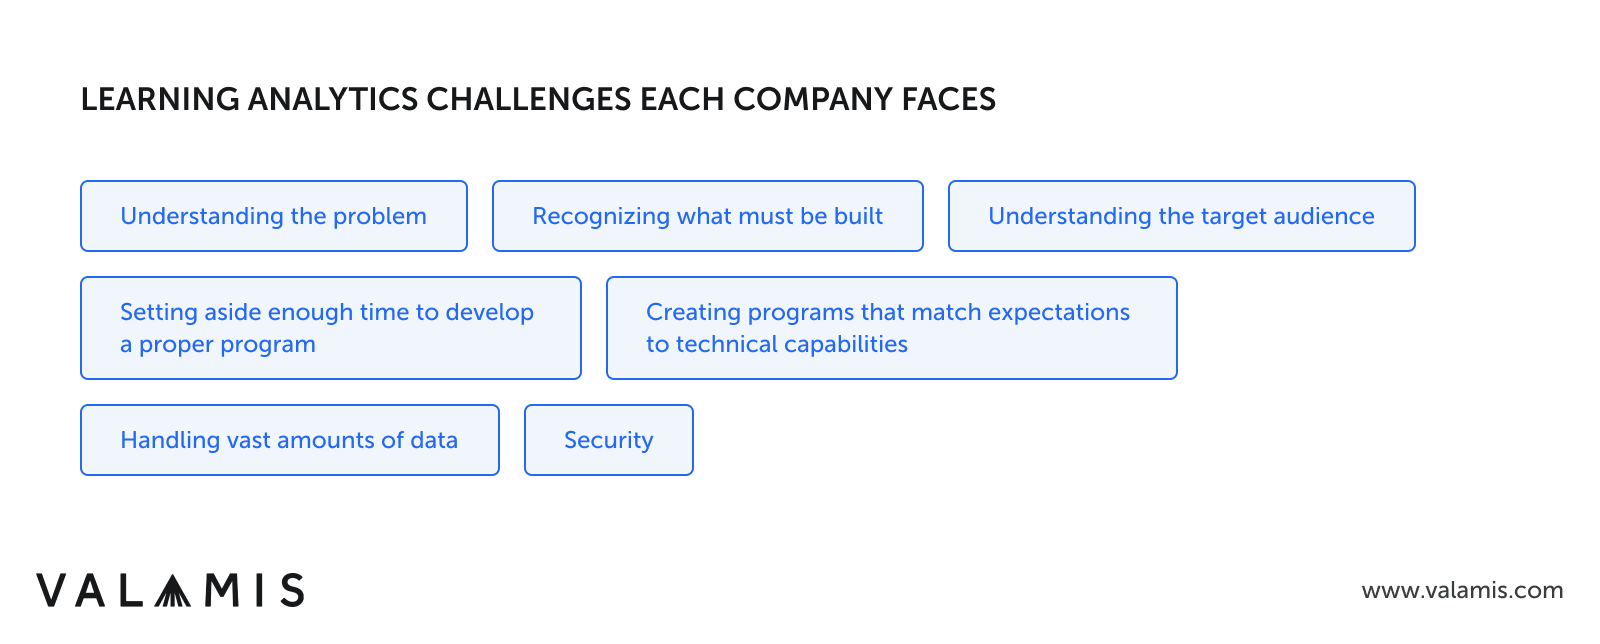 The list of learning analytics challenges each company faces